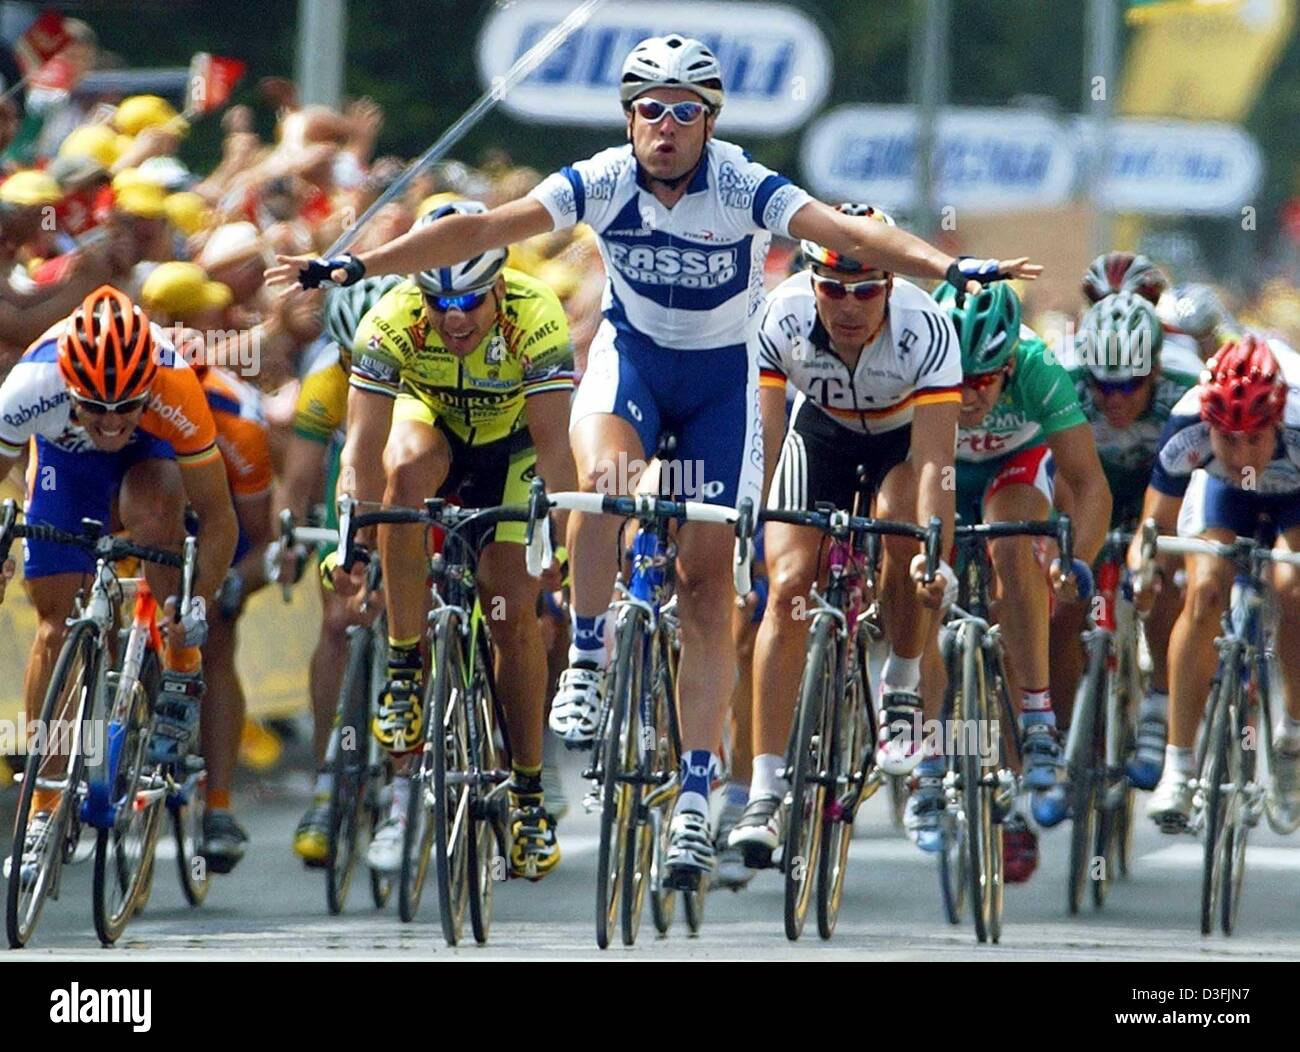 dpa) - Italian cyclist Alessandro Petacchi (C) of team Fassa Bortolo raises  his arms in victory as he crosses the finish line to win the third stage of  the Tour de France,